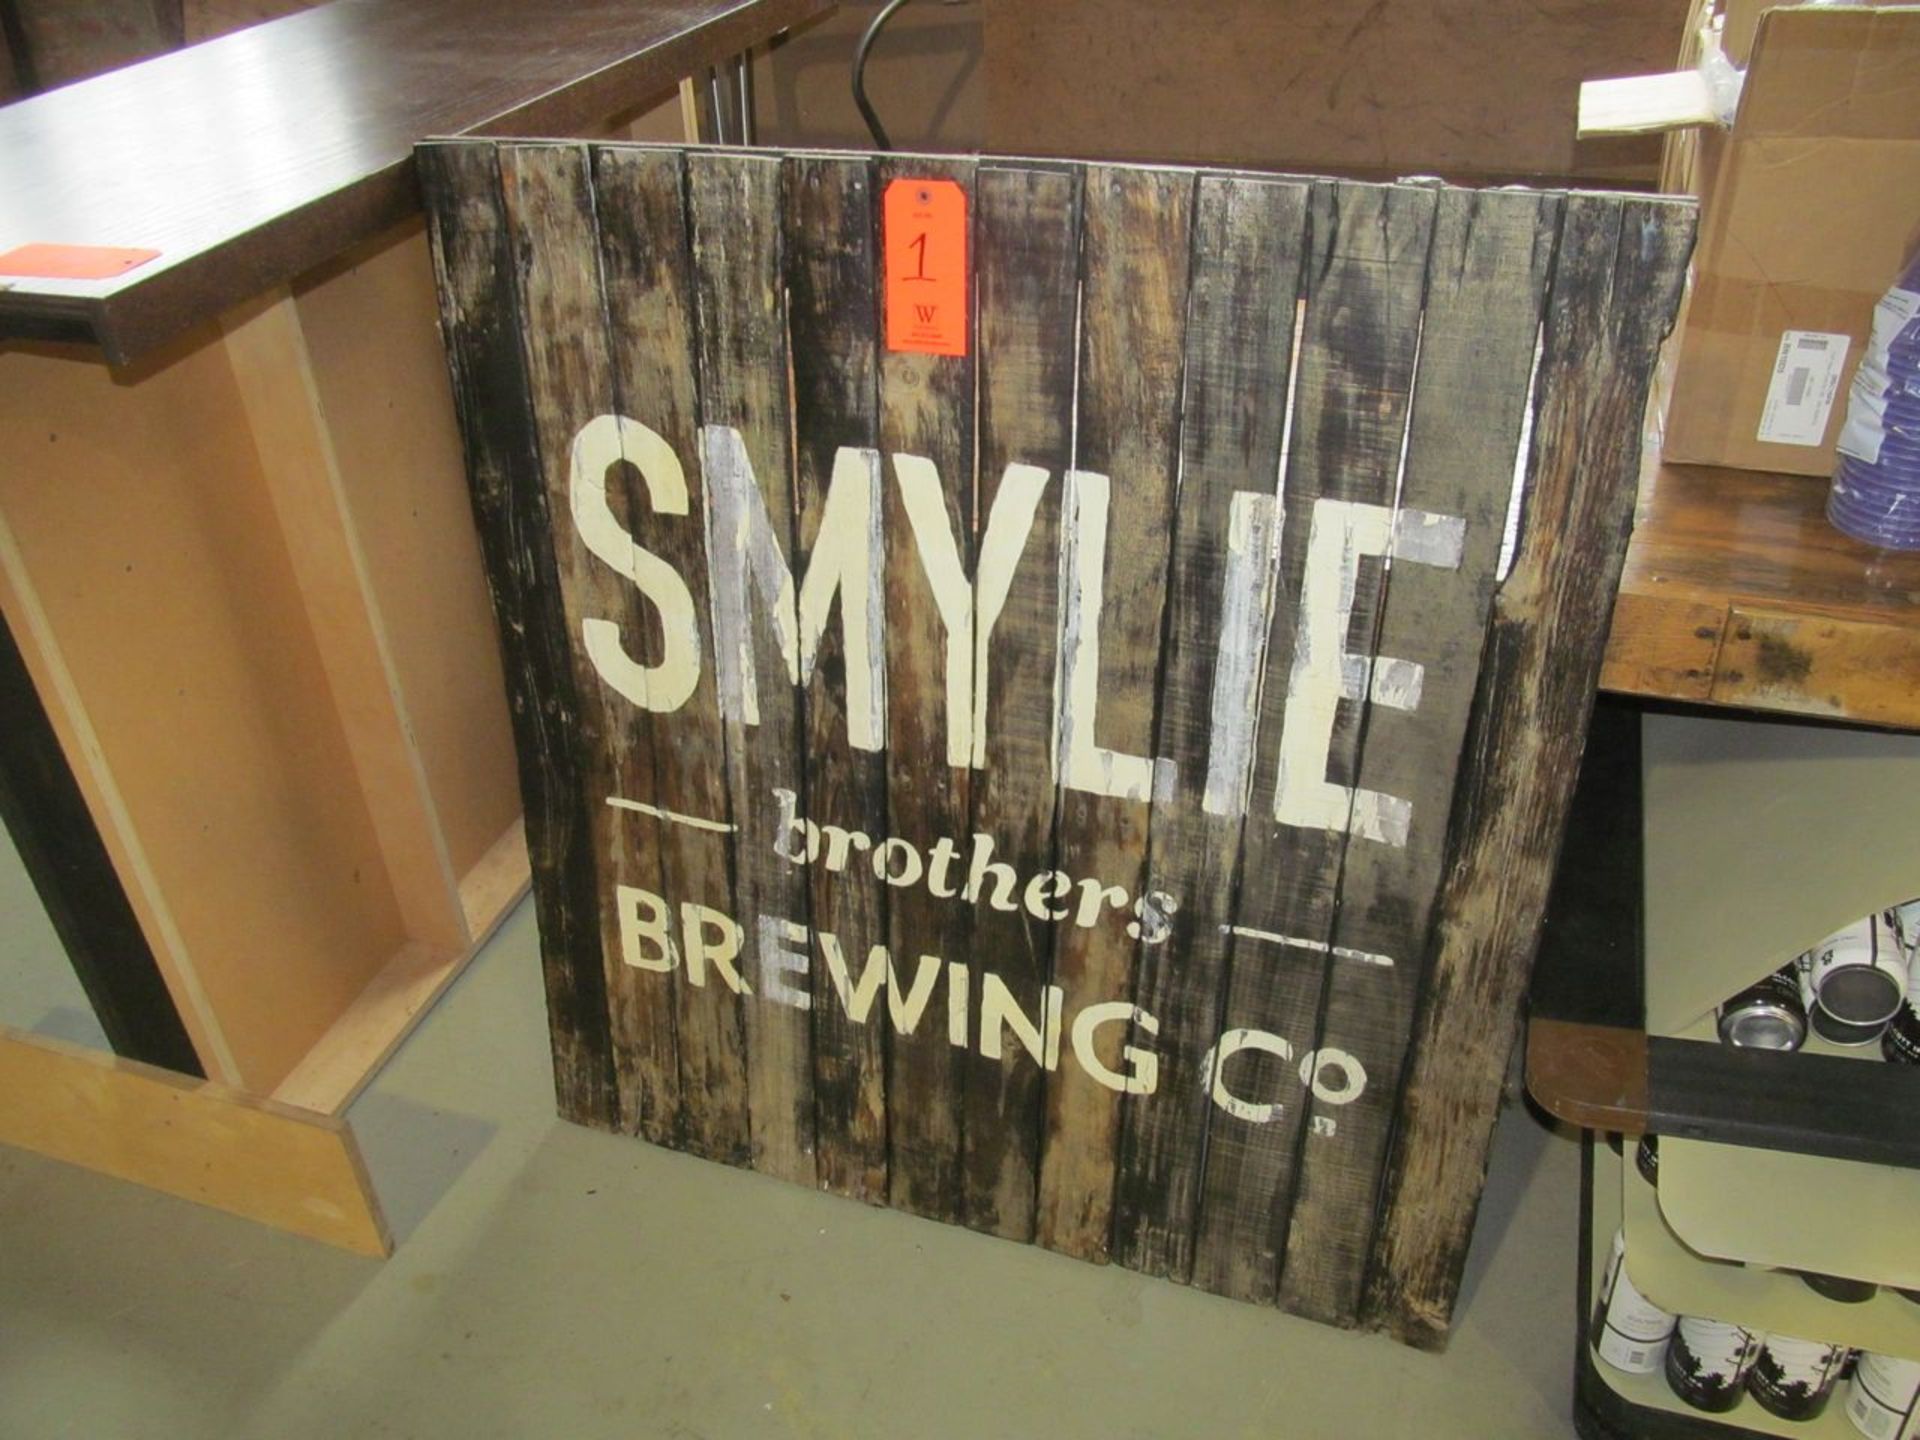 "Smylie Brothers Brewery Co." Wood Sign (Removal Cost: N/C)